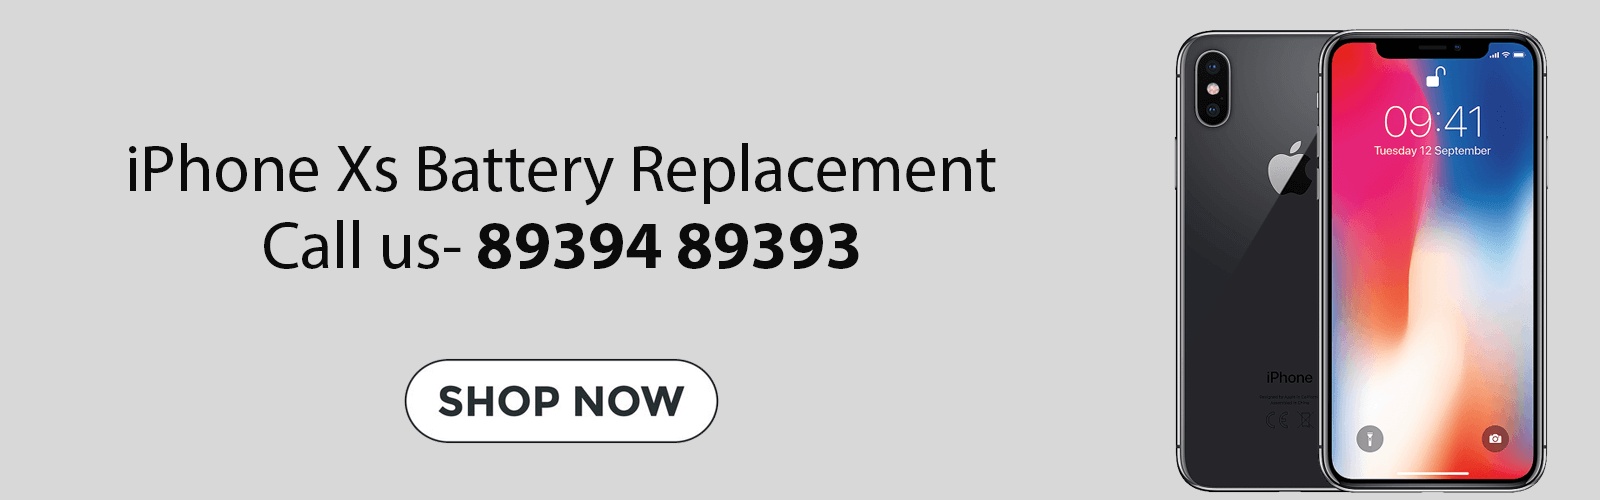 iPhone XS Battery Replacement Price Chennai